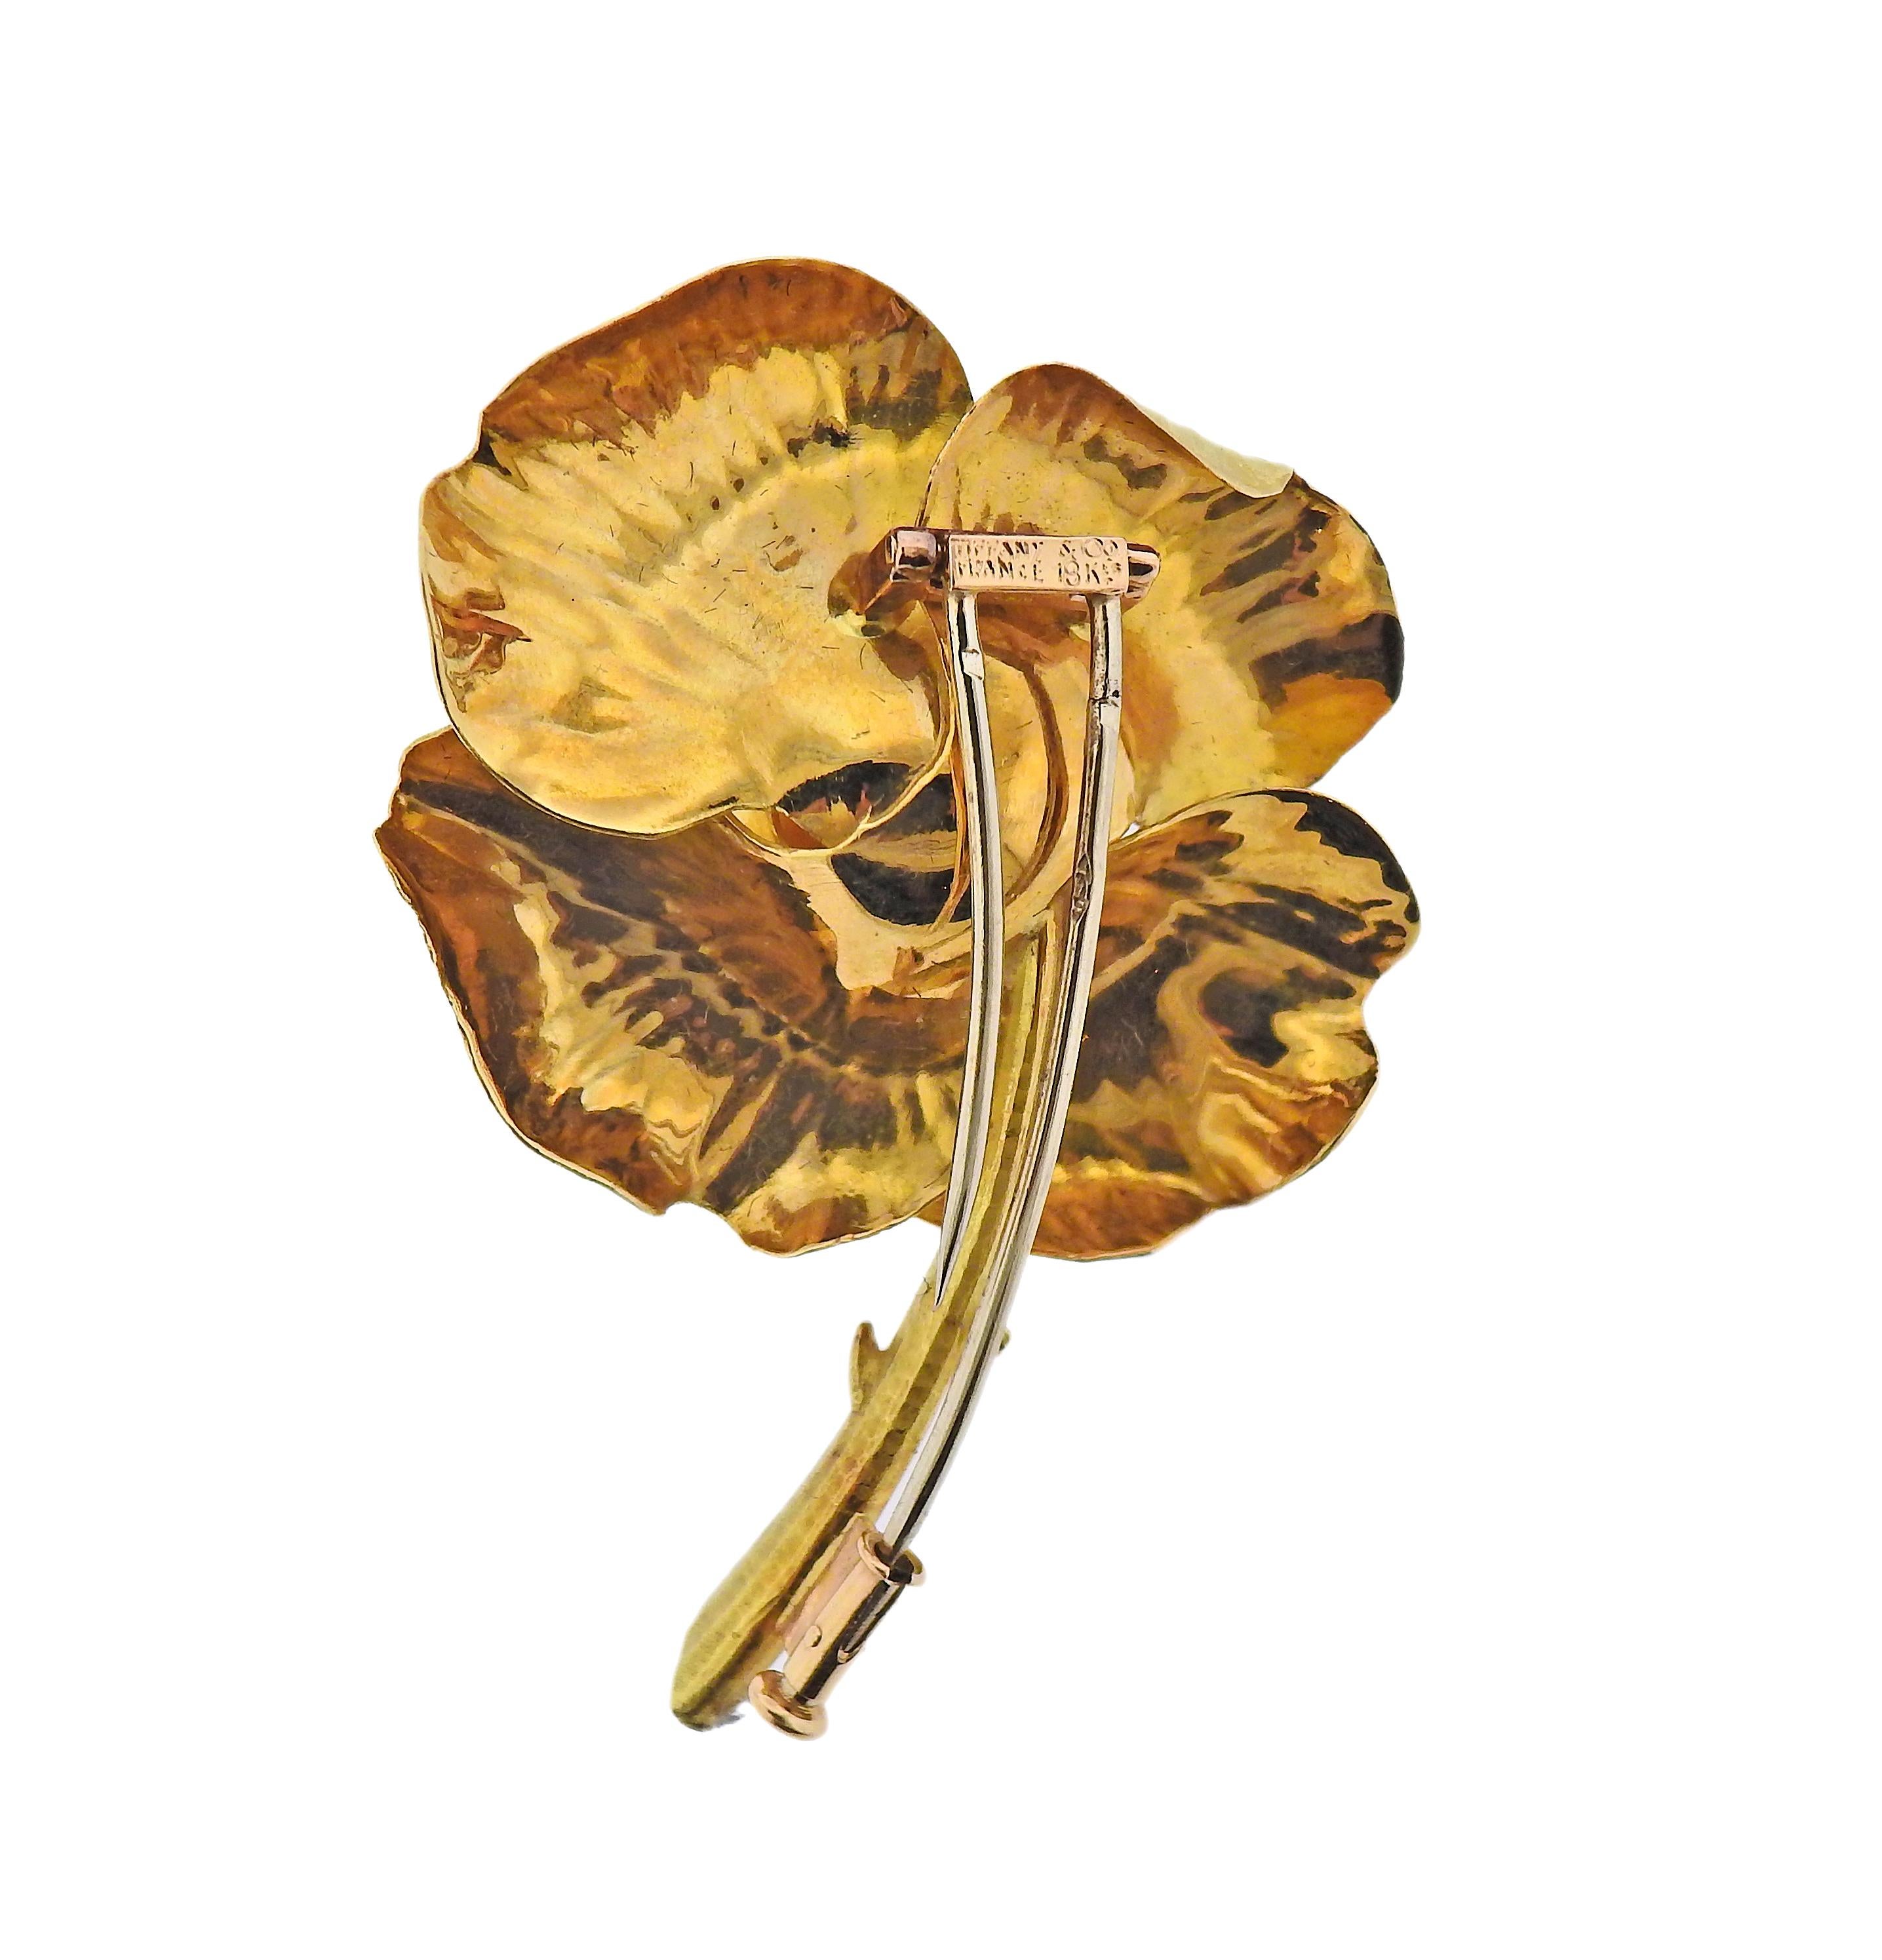 Made in France by Tiffany & Co, in 18k gold, rose flower brooch. Measuring 50mm x 38mm. Marked: Tiffany & Co, France, 18kts. Weight - 16.5 grams.